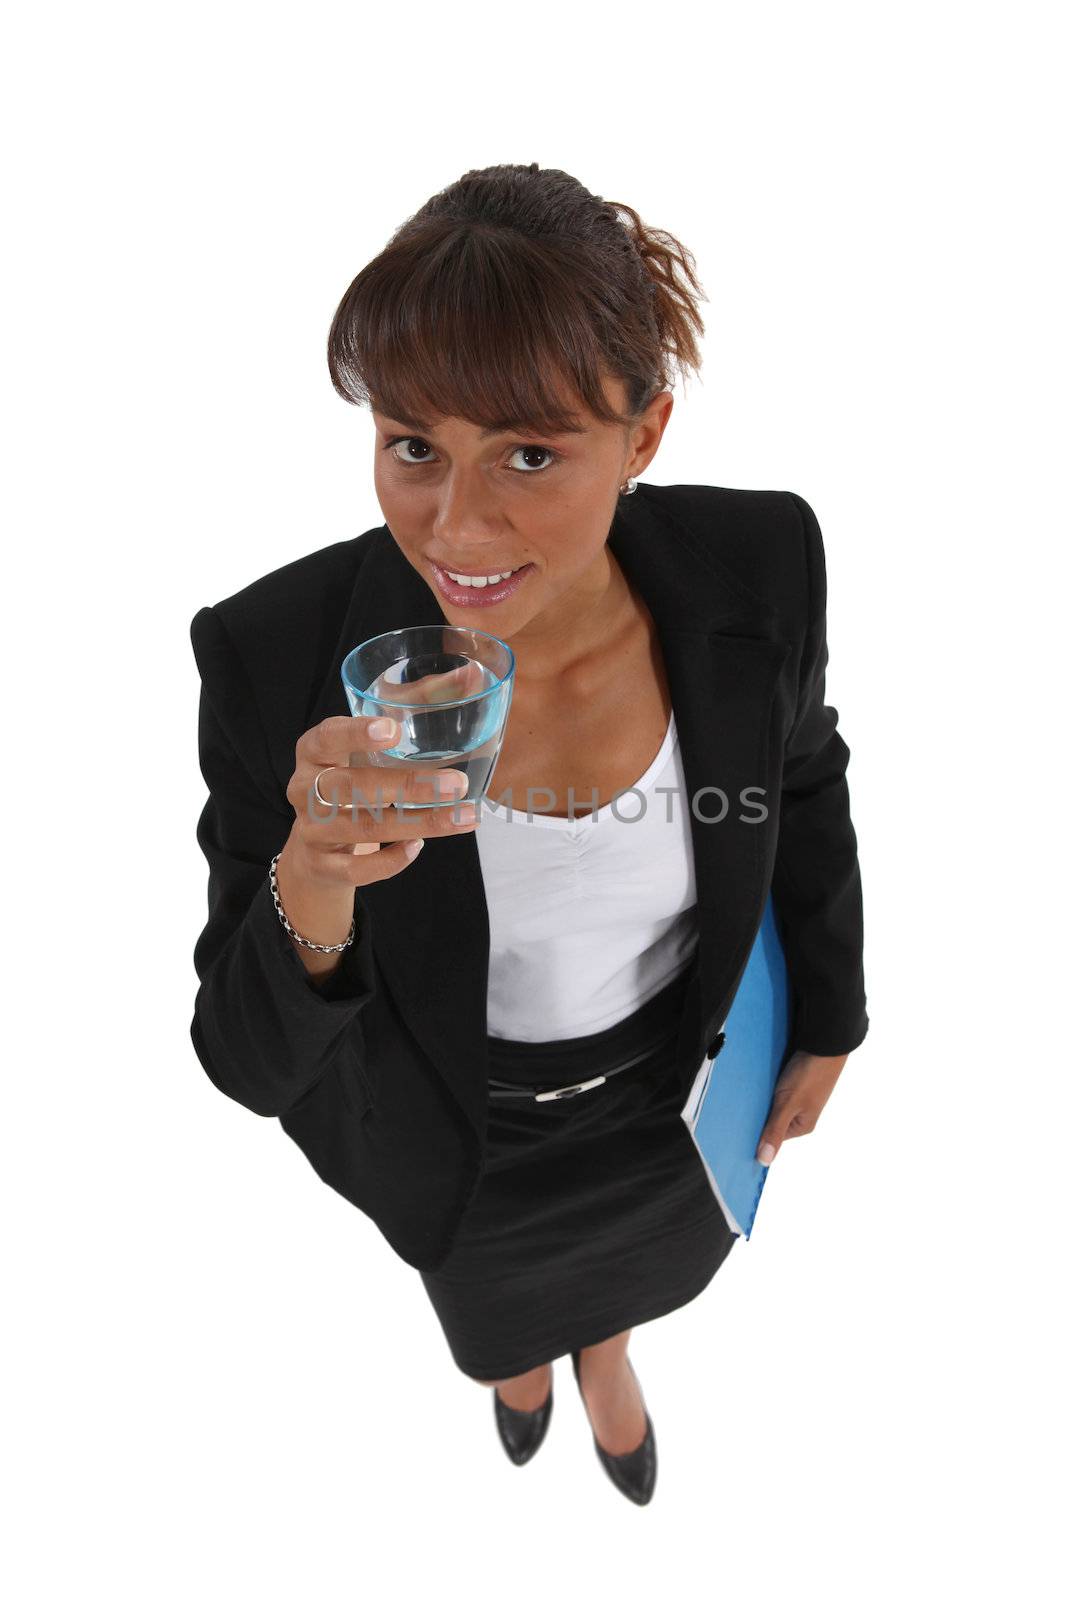 Businesswoman drinking a glass of water by phovoir